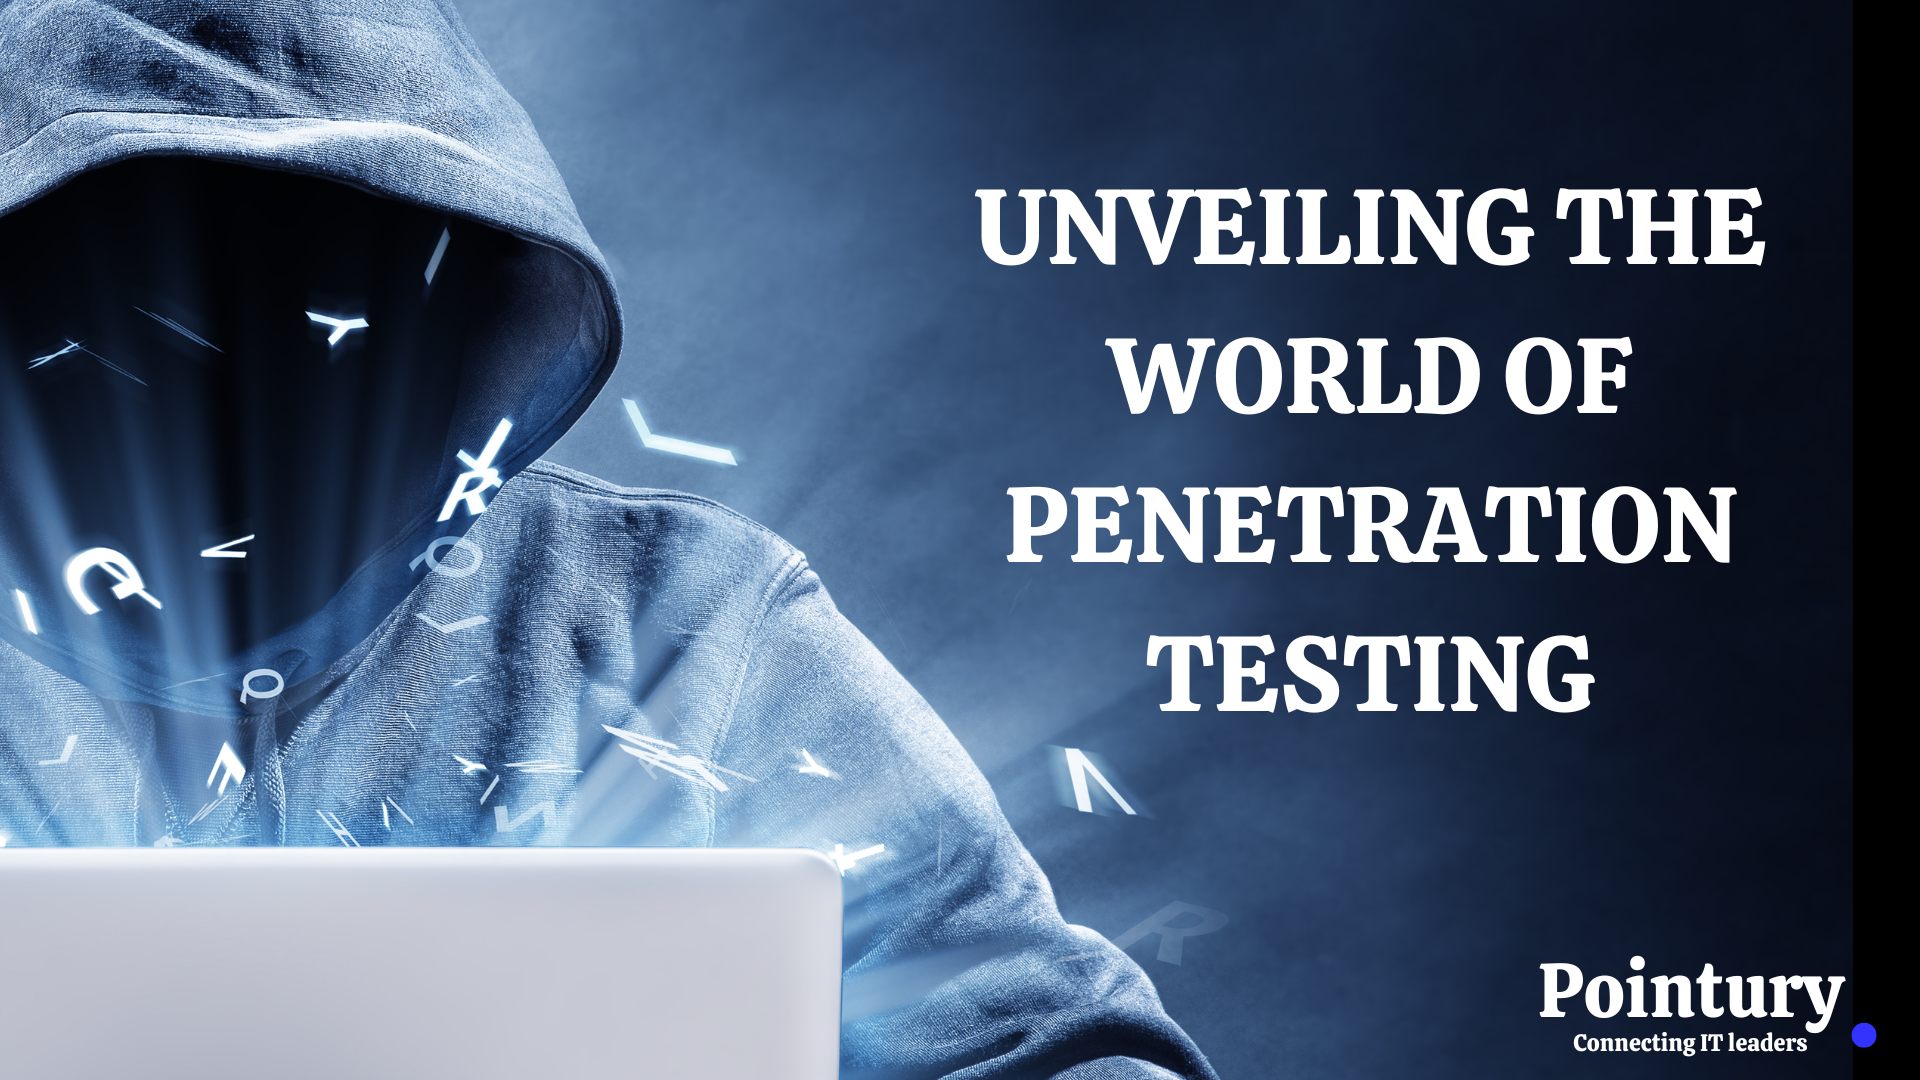 UNVEILING THE WORLD OF PENETRATION TESTING